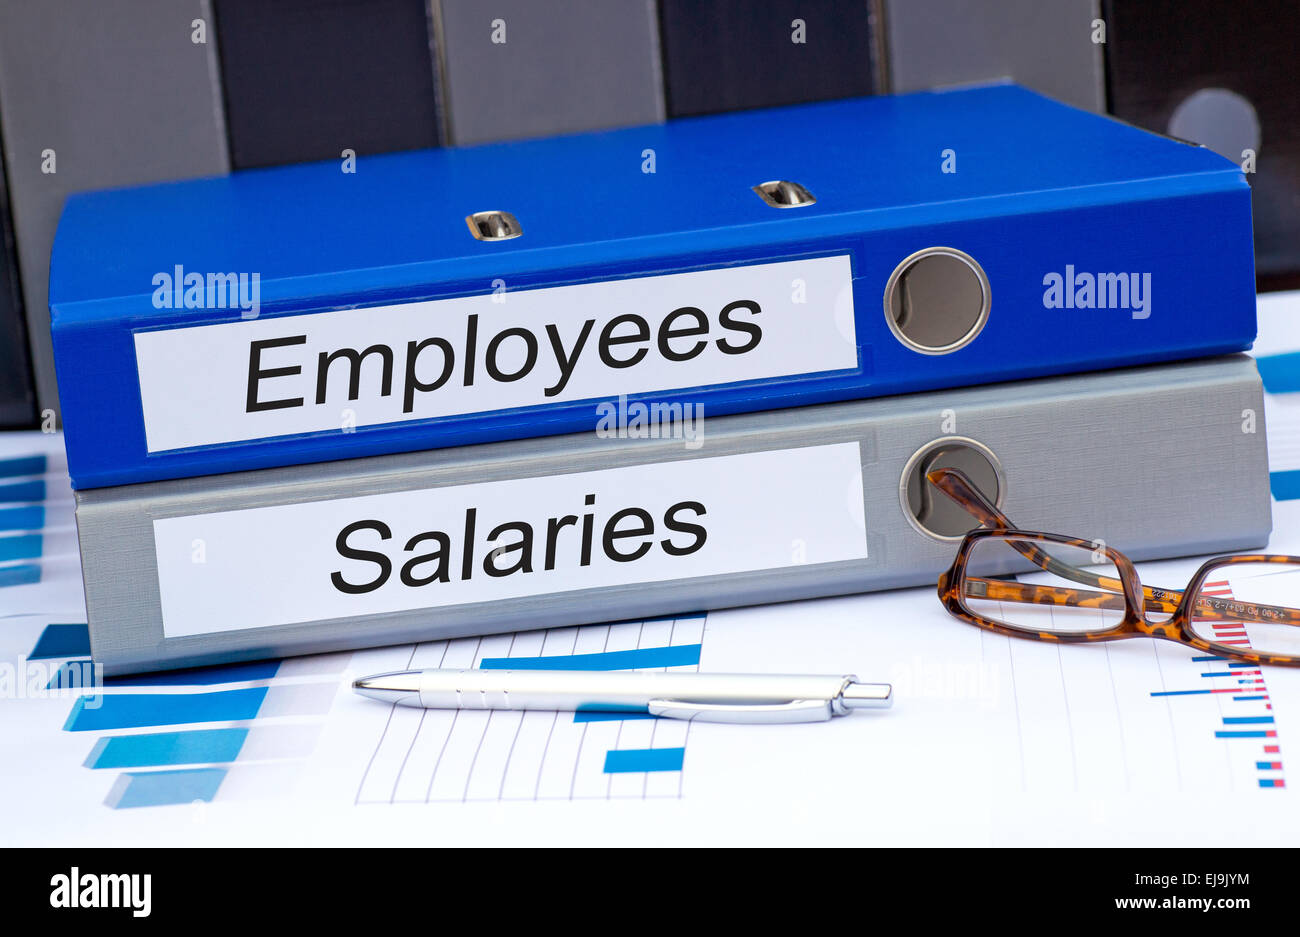 Employees and Salaries Stock Photo